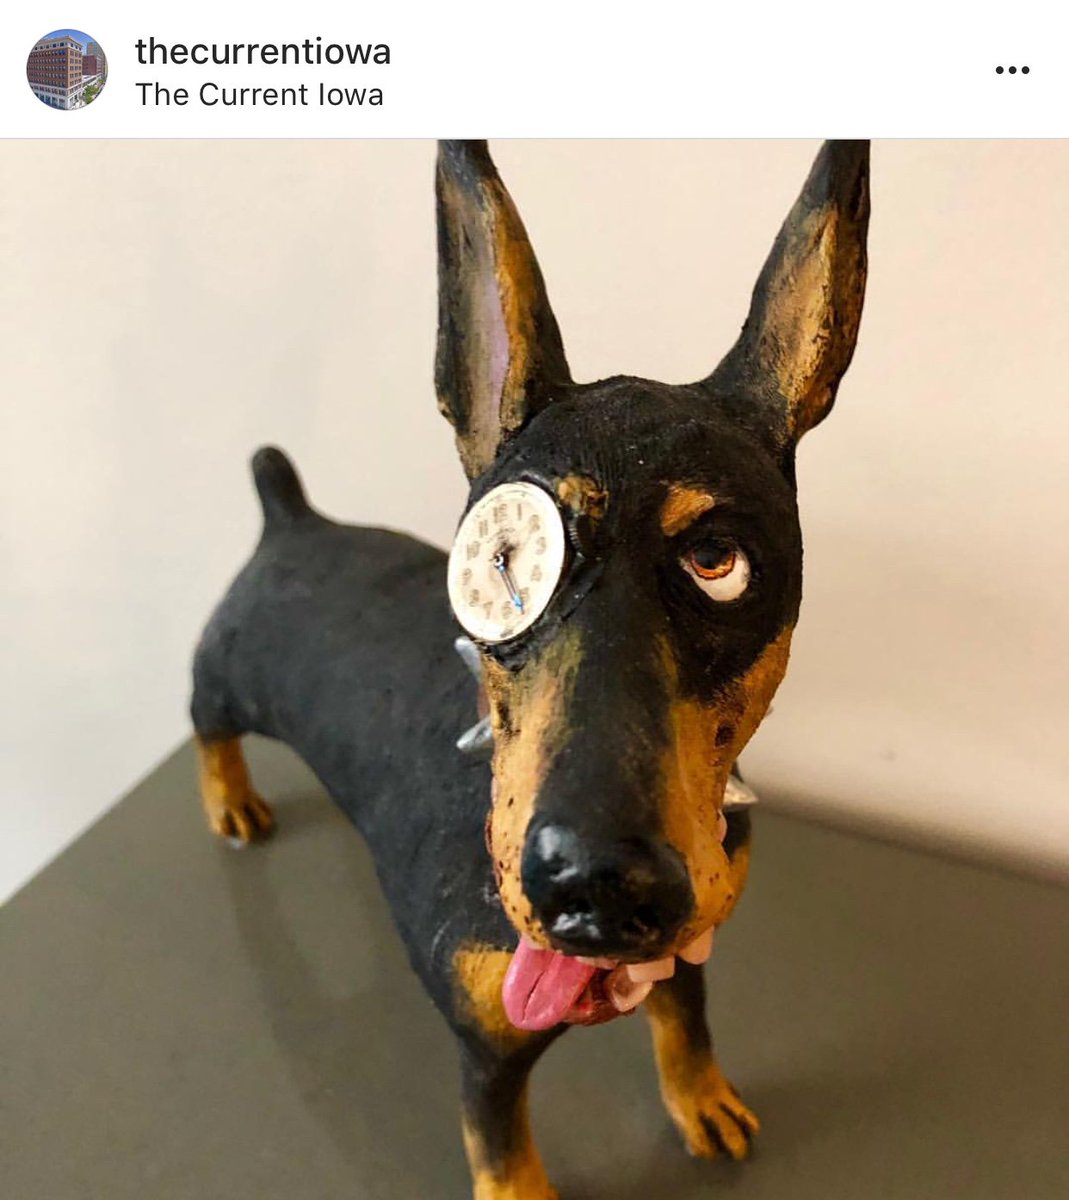 Did you know @TheCurrentIowa located in downtown Davenport, IA is dog friendly? Every room features a unique piece of art. They even offer a special Bow Wow Package for your 4-legged companion!
#repost #DogSpots #dogfriendly #dogfriendlyplaces #dogfriendlyhotel #bowwow #artsy